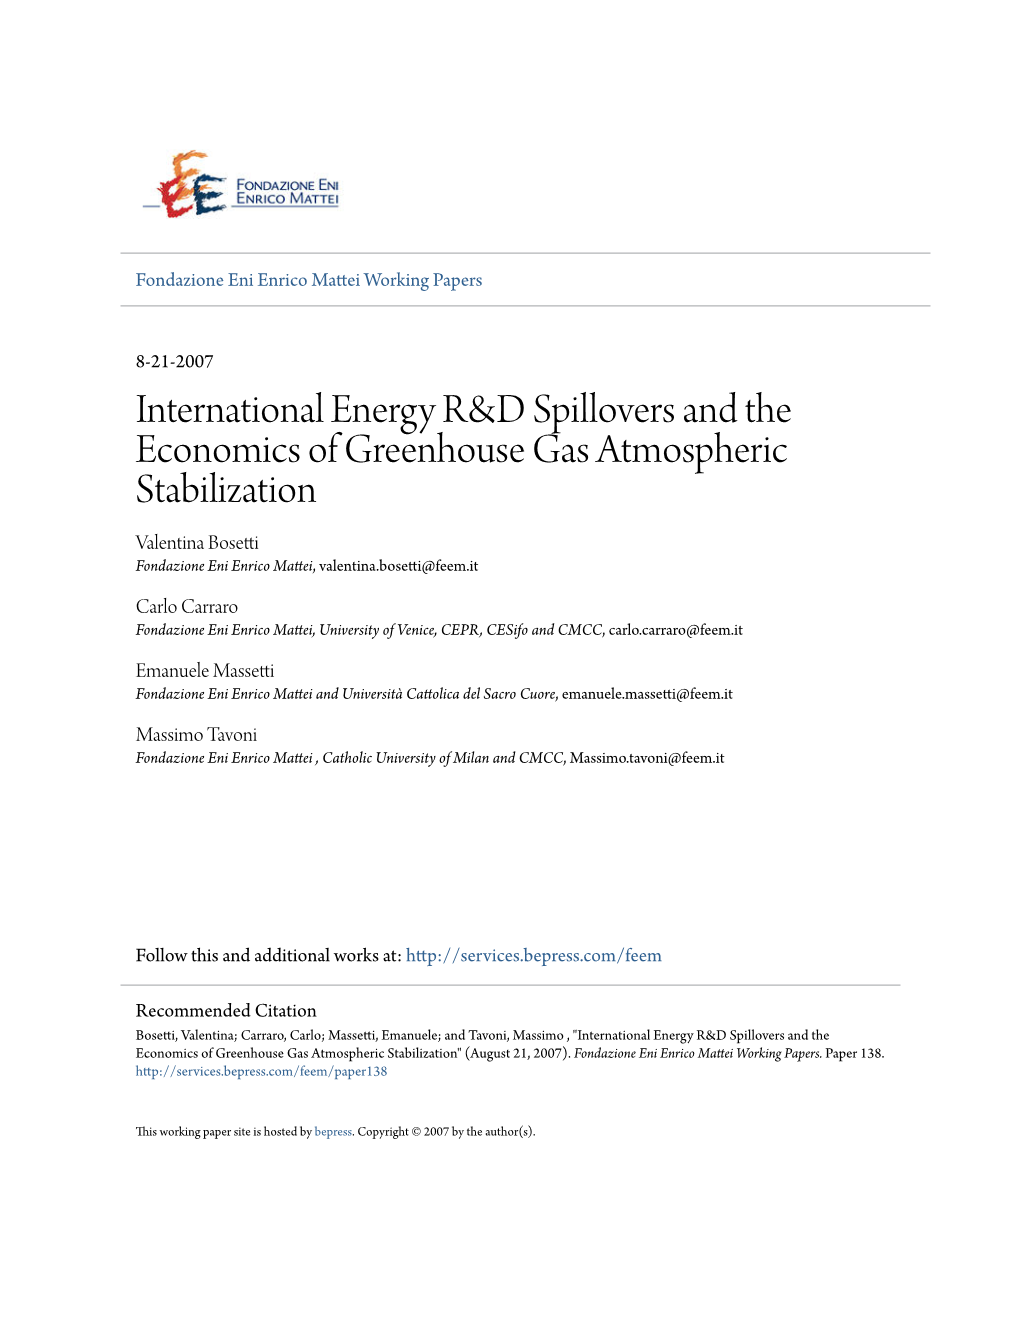 International Energy R&D Spillovers and the Economics of Greenhouse Gas Atmospheric Stabilization